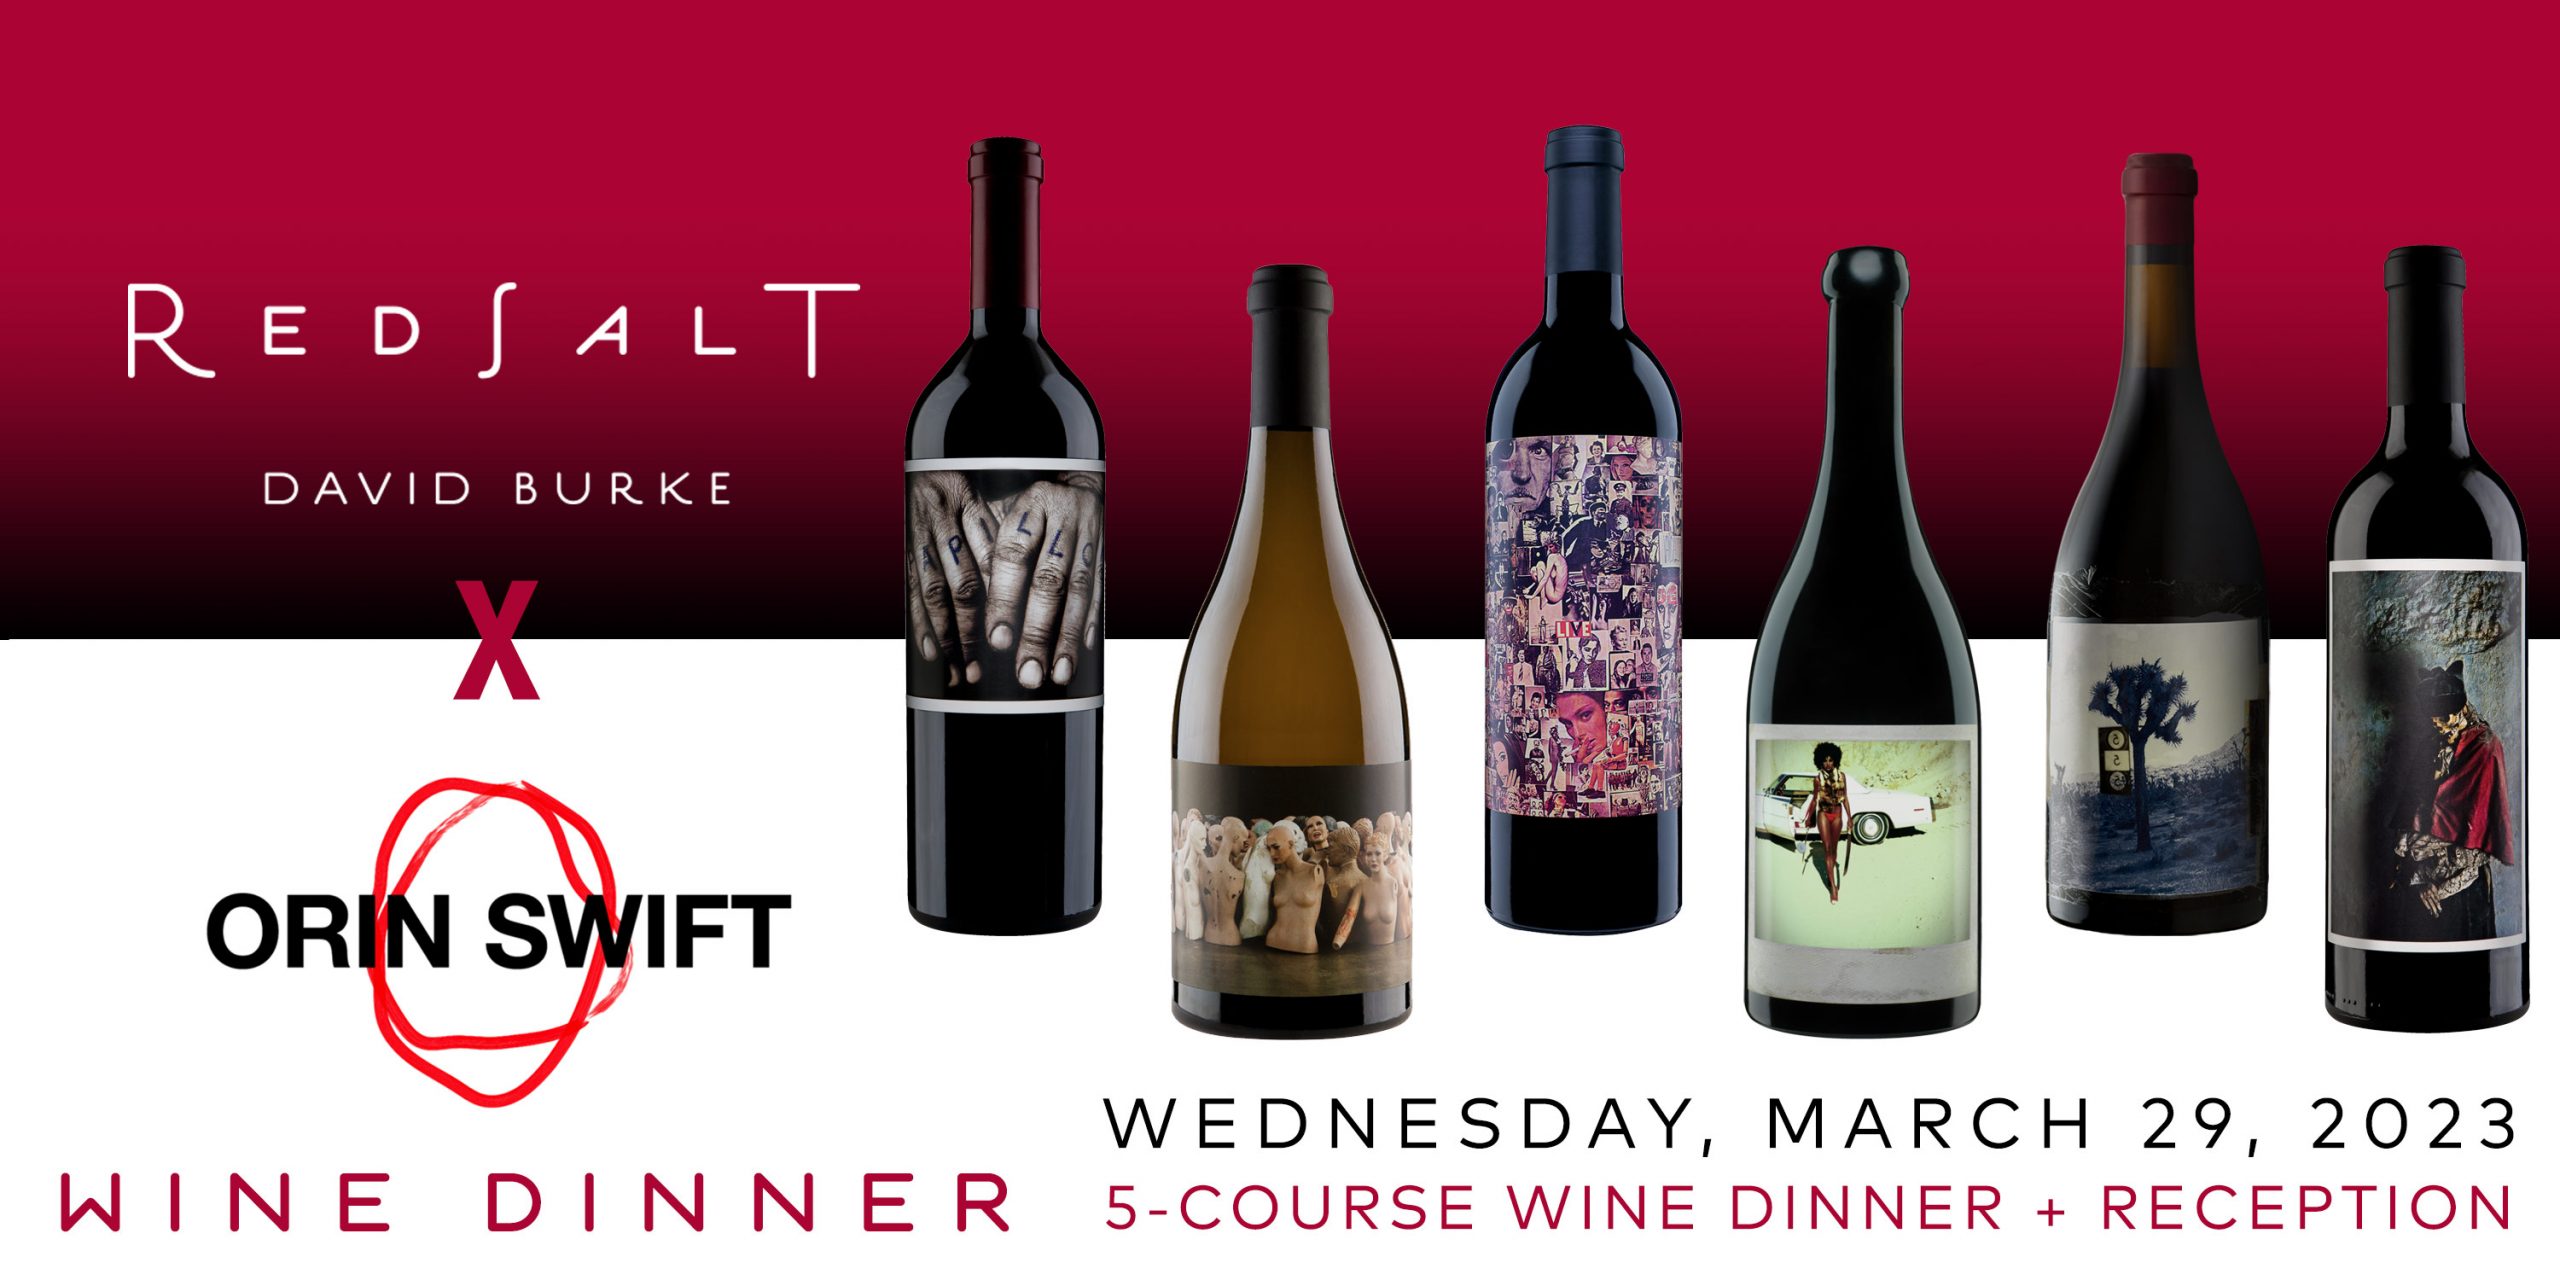 Orin Swift Wine Paired Dinner at Red Salt by David Burke